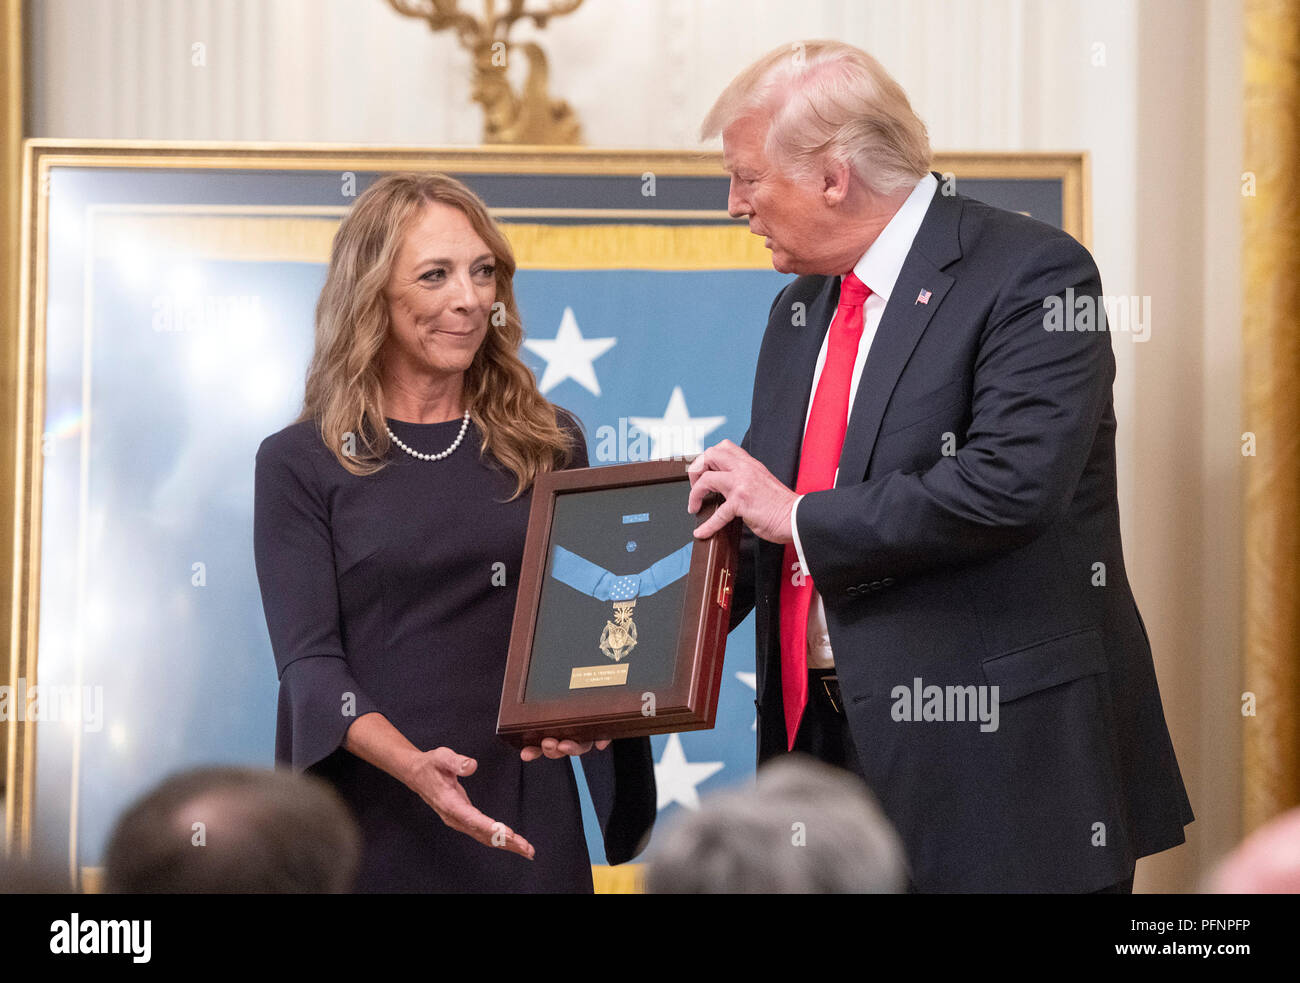 Valerie Nessel, widow of Technical Sergeant John A. Chapman, United States Air Force, left, stands with US President Donald J. Trump, center, as she accepts the Medal of Honor posthumously from the President during a ceremony in the East Room of the White House in Washington, DC on Wednesday, August 22, 2018. Sergeant Chapman is being honored for his actions on March 4, 2002, on Takur Ghar mountain in Afghanistan where he gave his life to save his teammates. Credit: Ron Sachs/CNP /MediaPunch Stock Photo